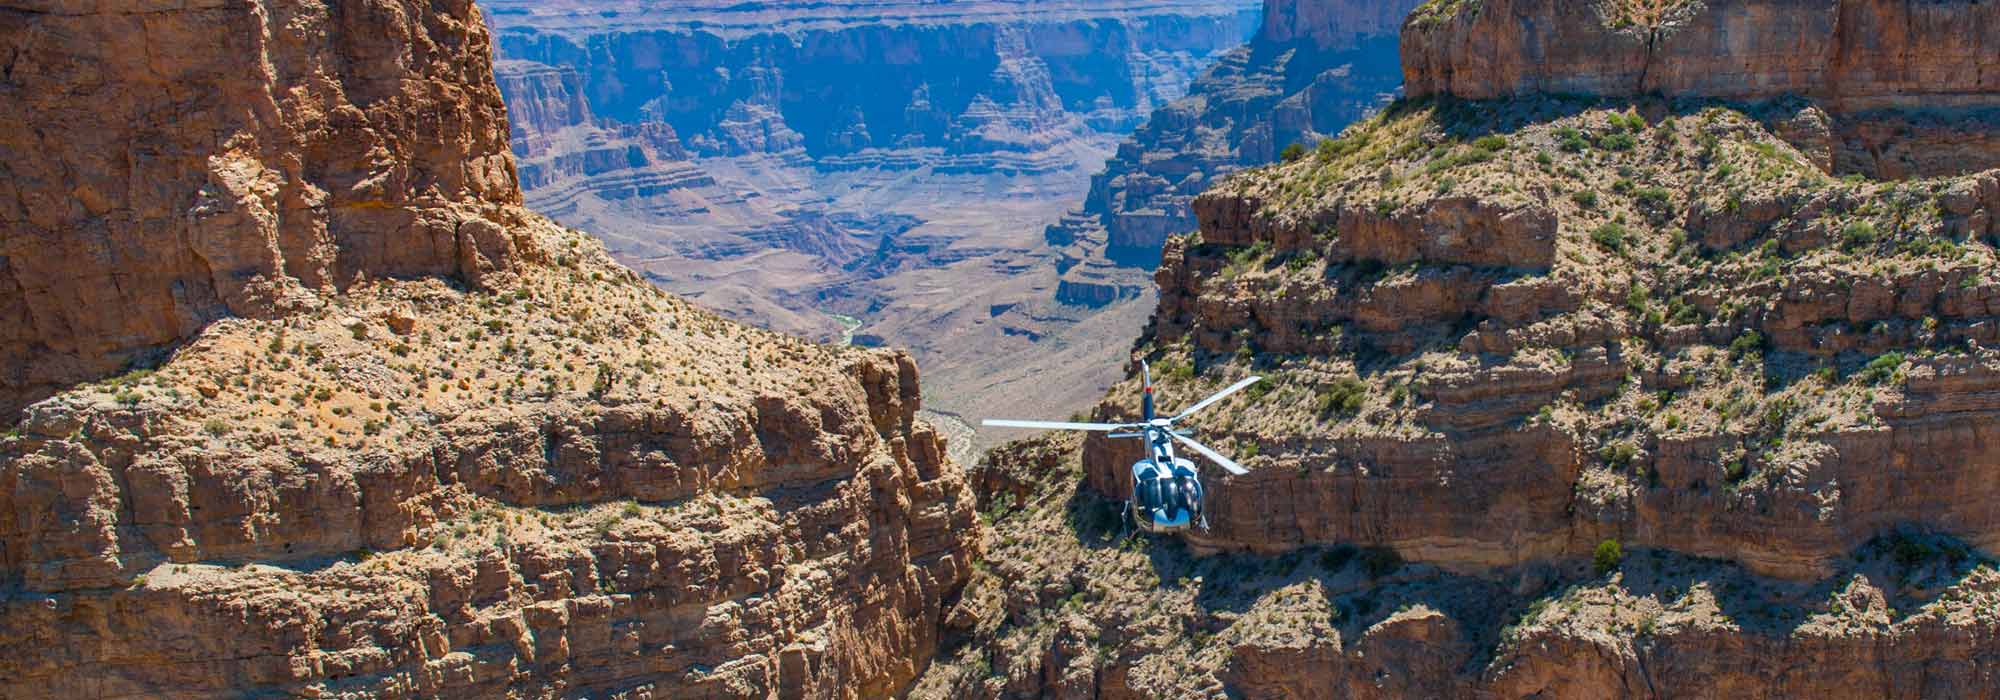 Best way to see the Grand Canyon from Las Vegas is with a helicopter tour